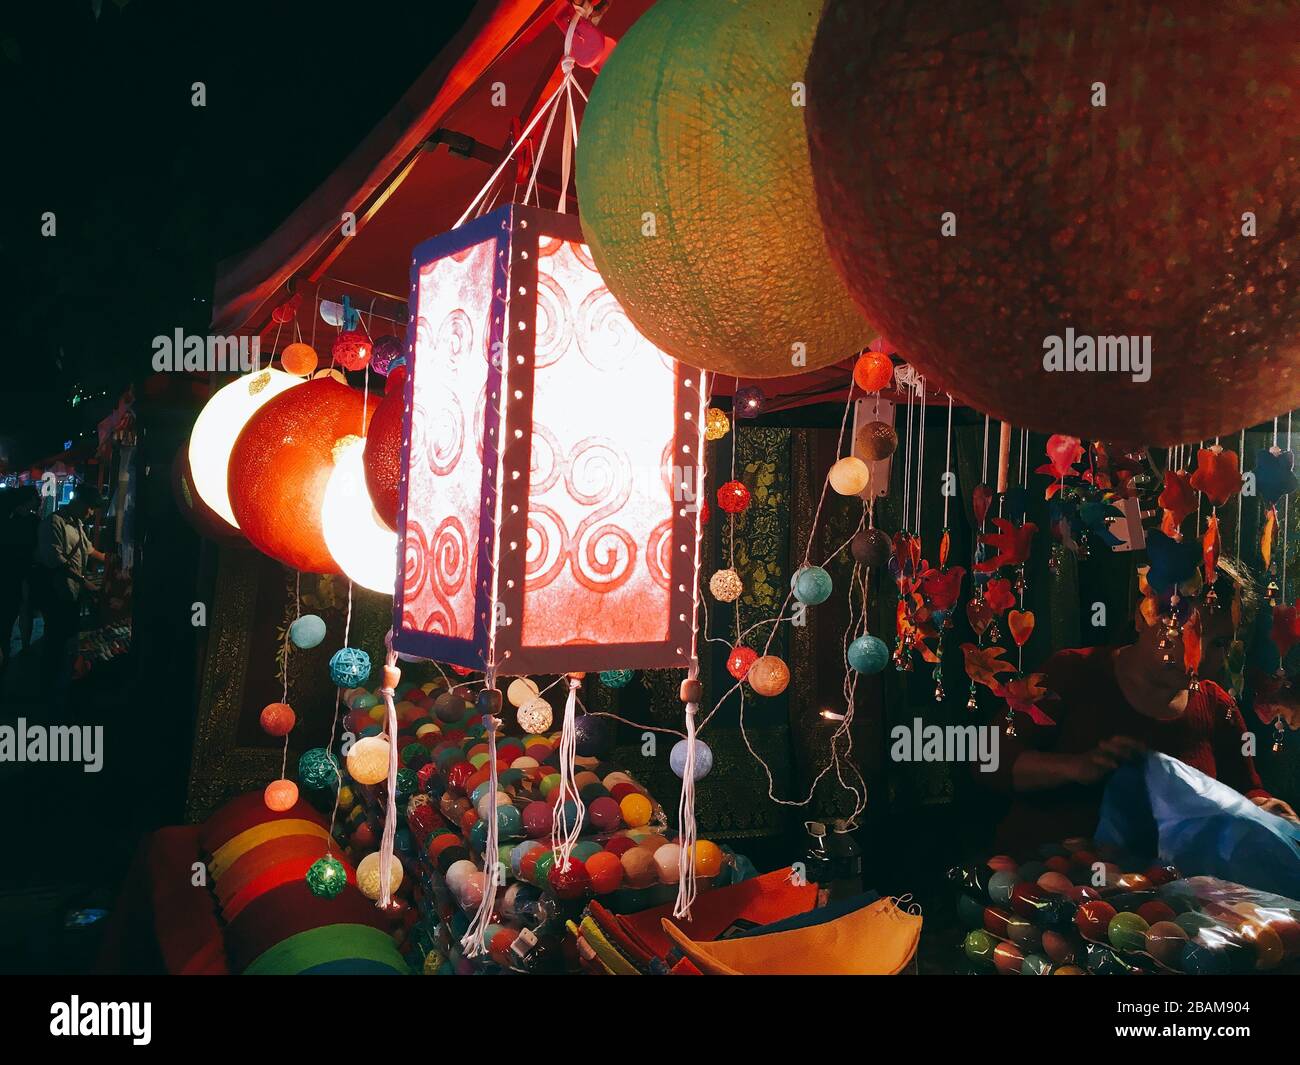 Colorful Red Lights and Ornaments of Laos at Night Market, Vientiane, Laos Stock Photo